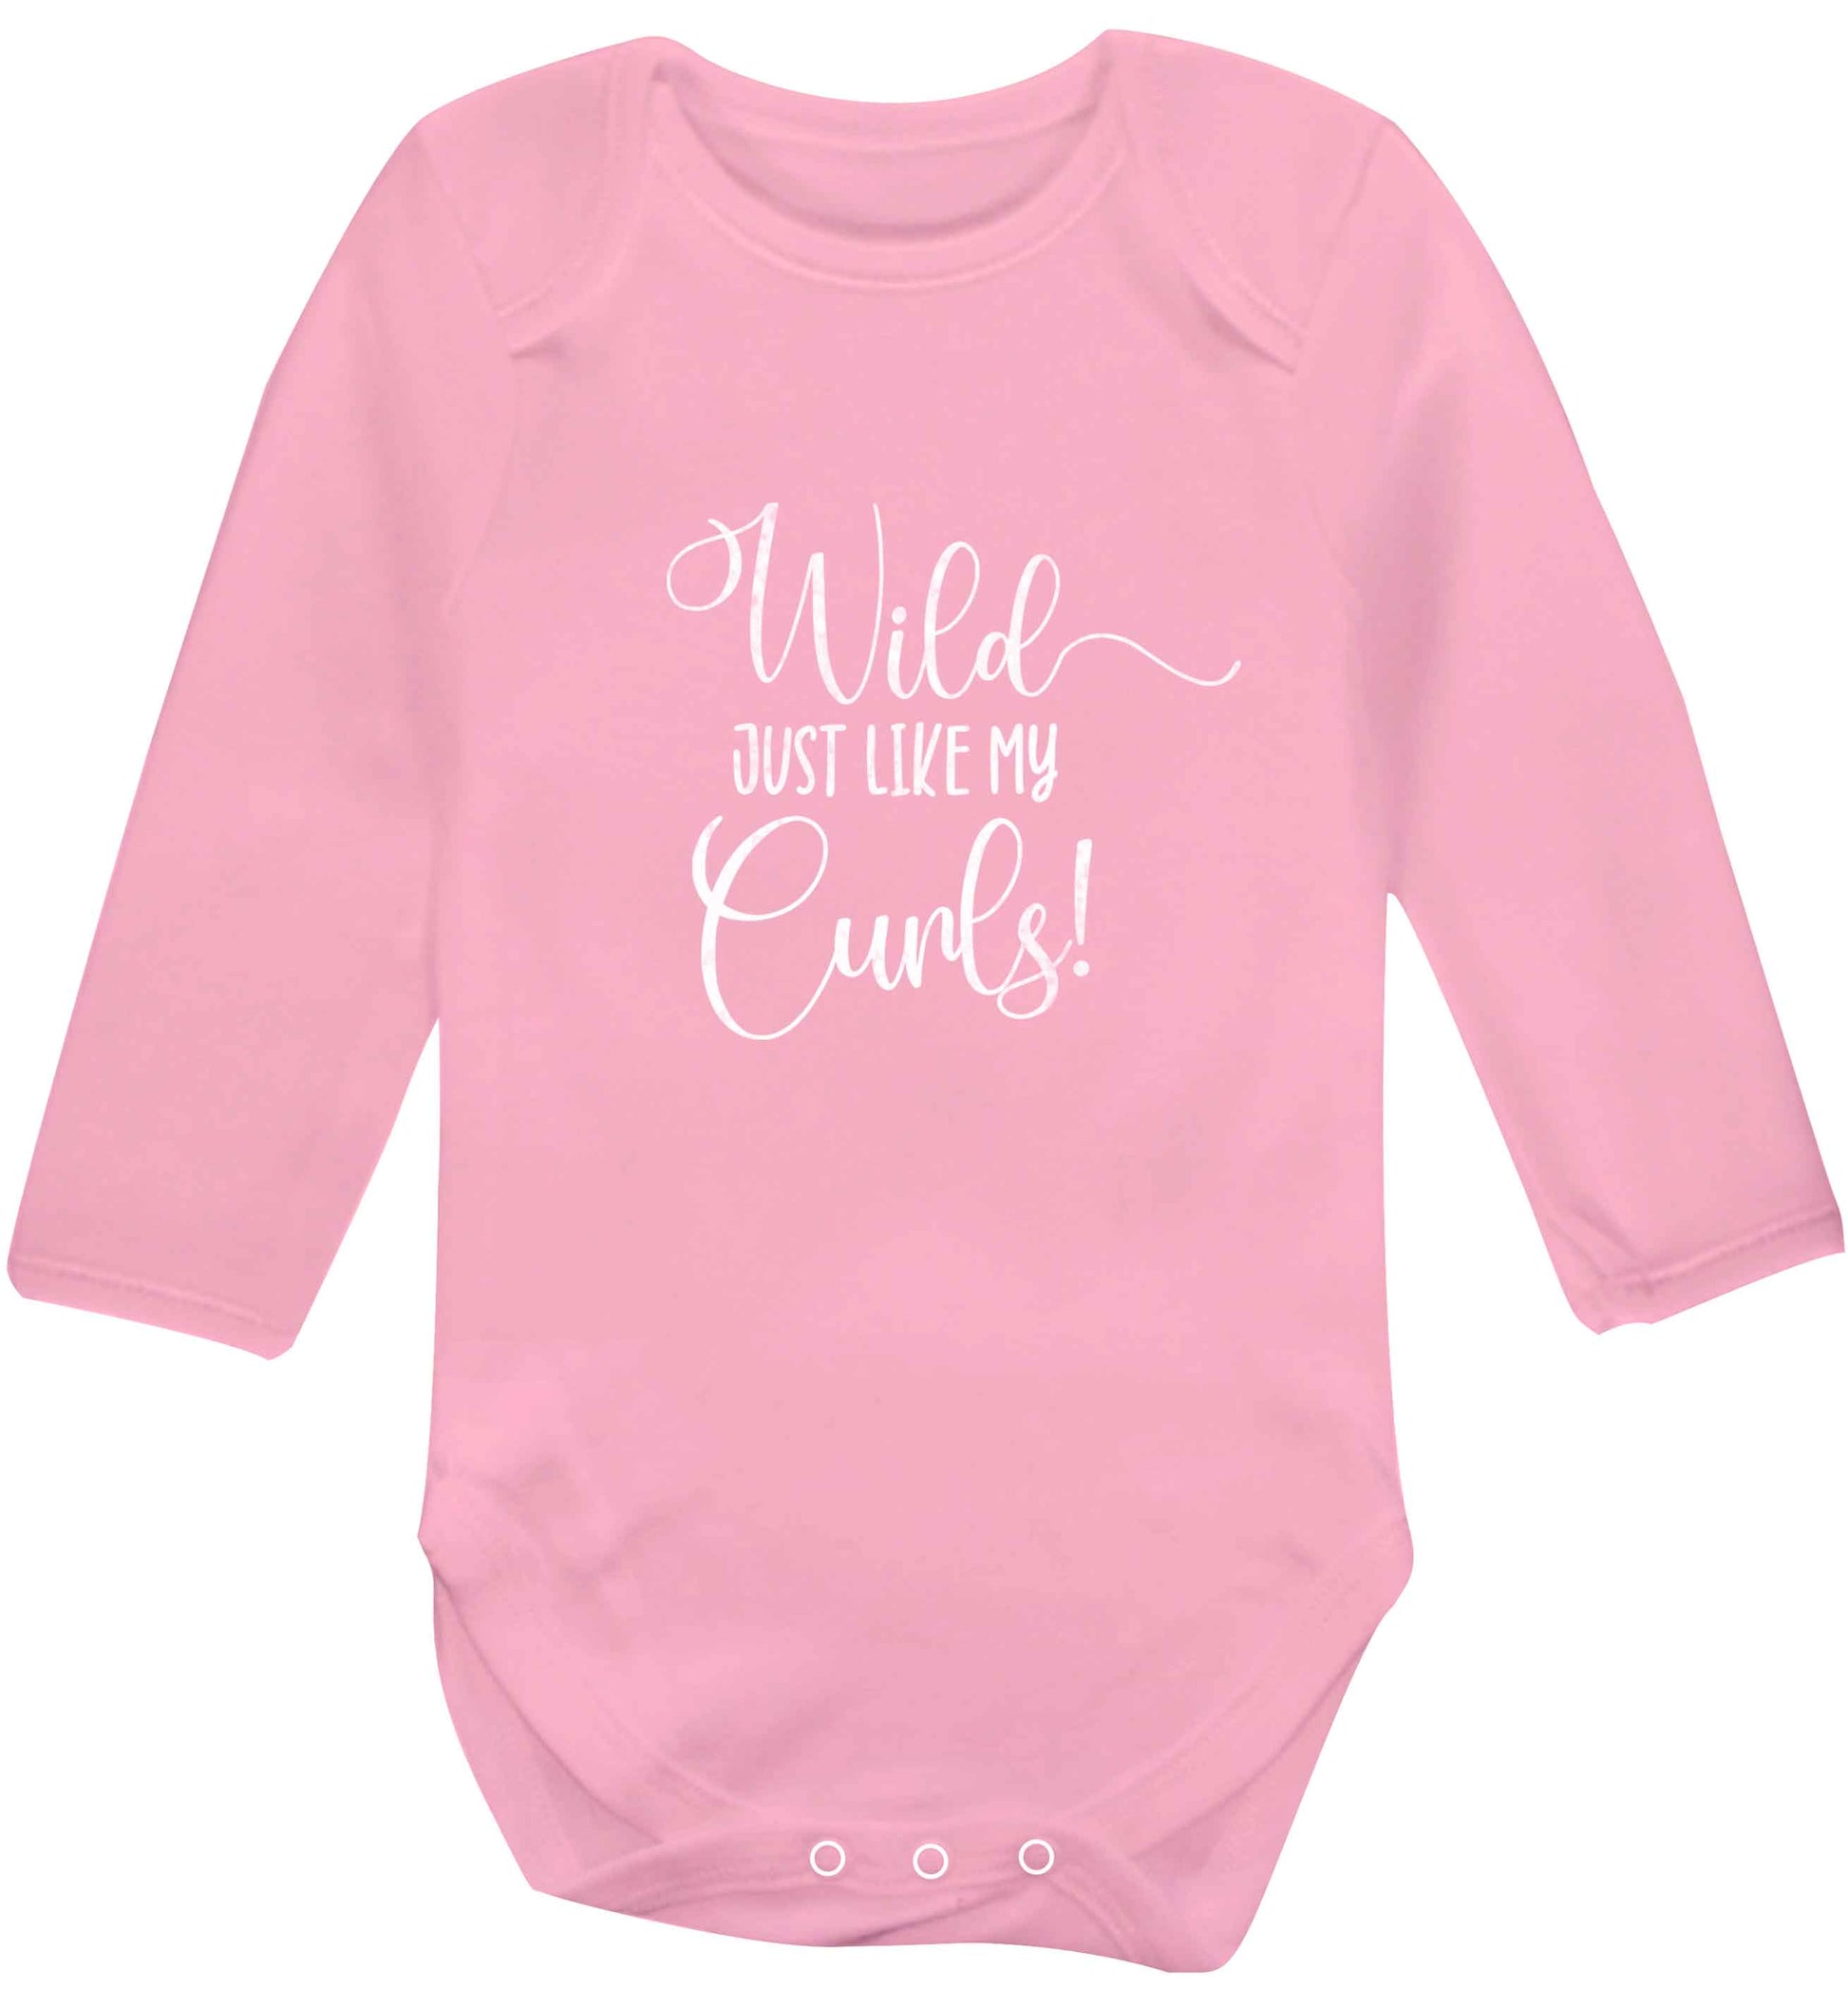 Wild just like my curls baby vest long sleeved pale pink 6-12 months